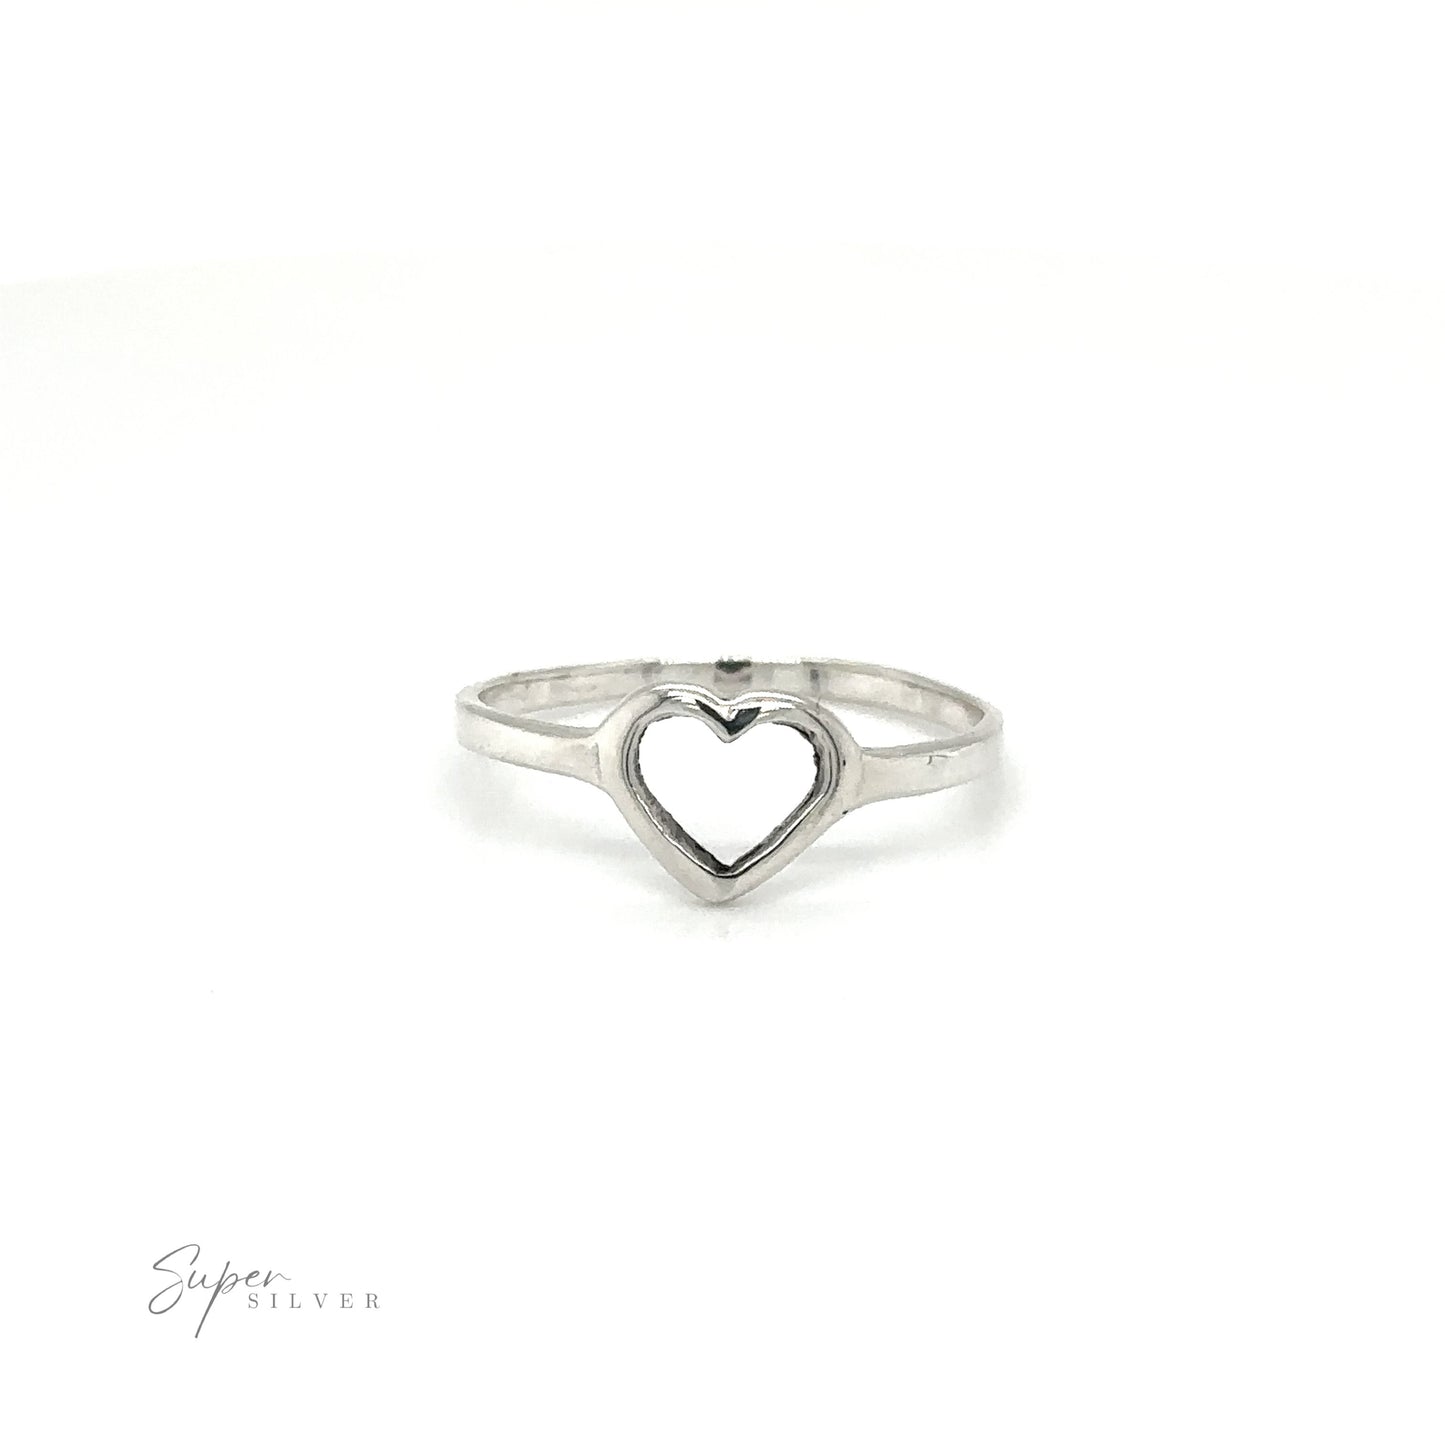 A Delicate Heart Outline Ring on a white background.